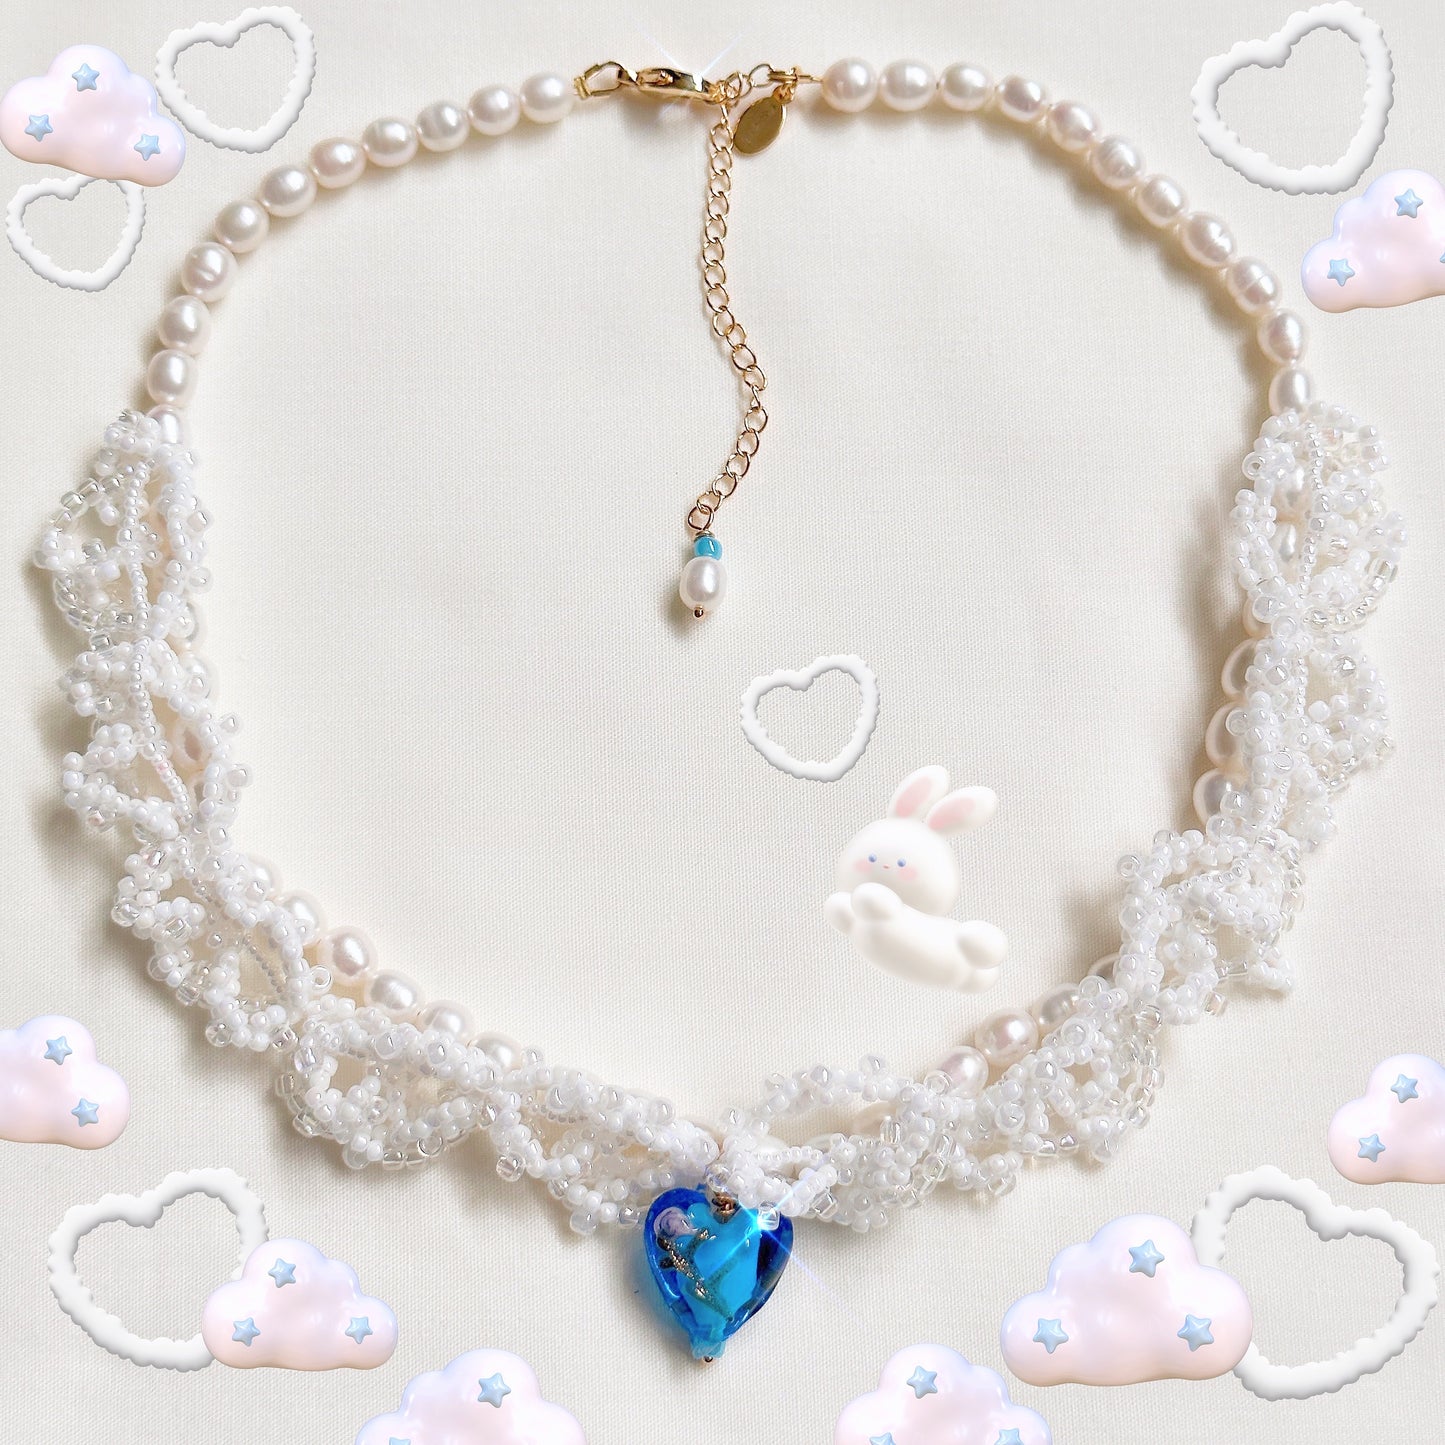 Puffy Cloud - beaded white lace necklace